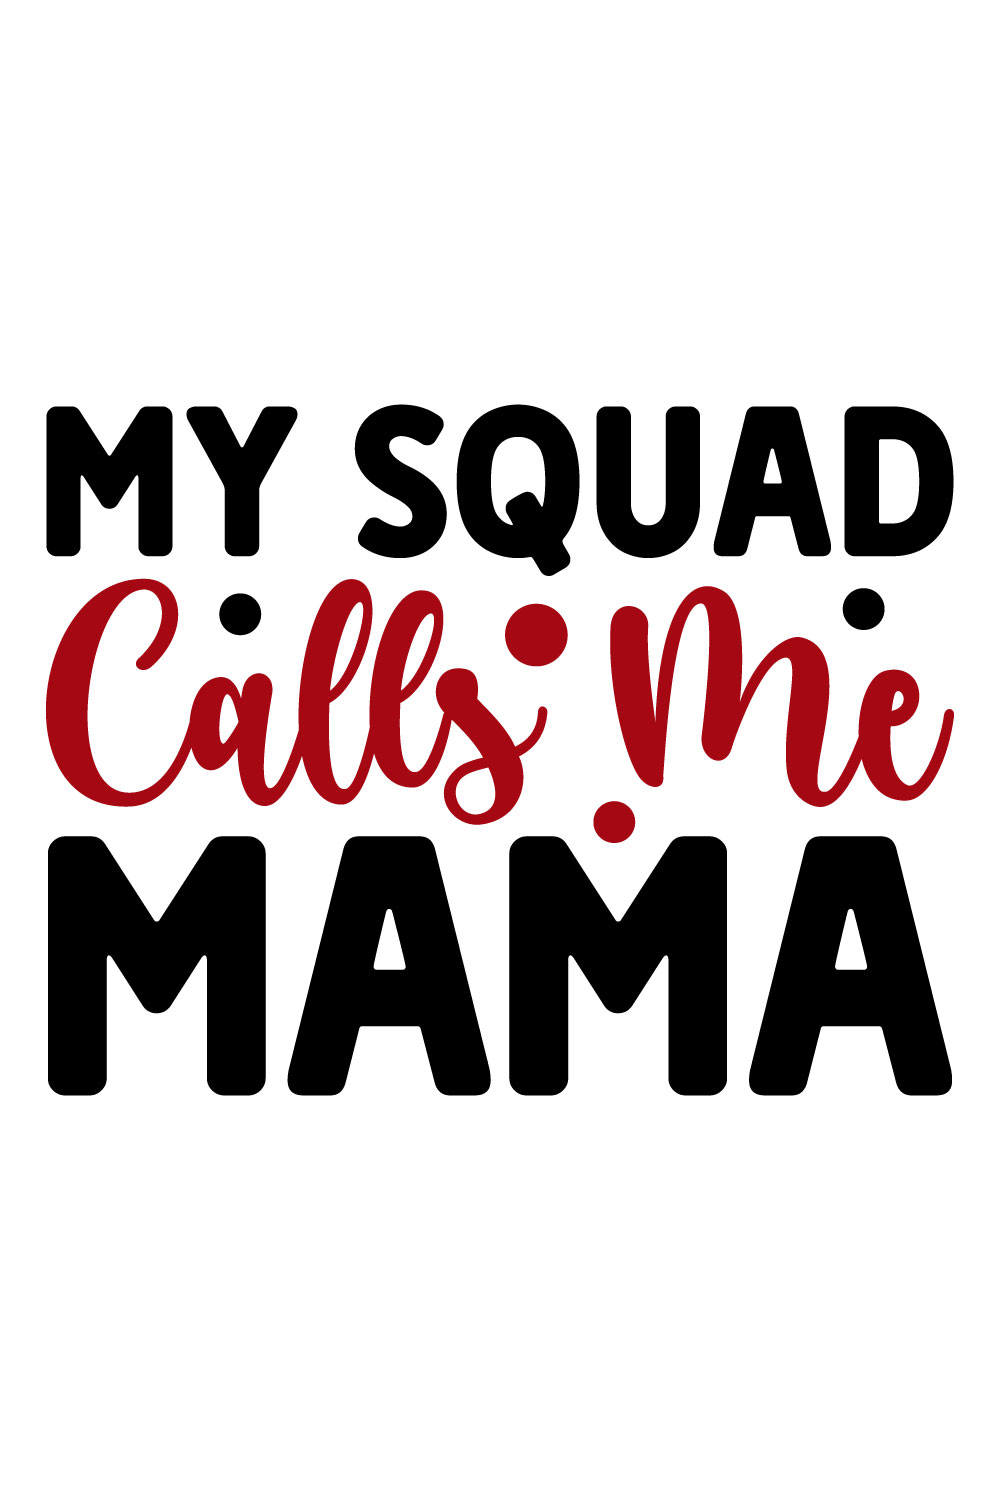 Image for prints with colorful inscription My Squad Calls Me Mama